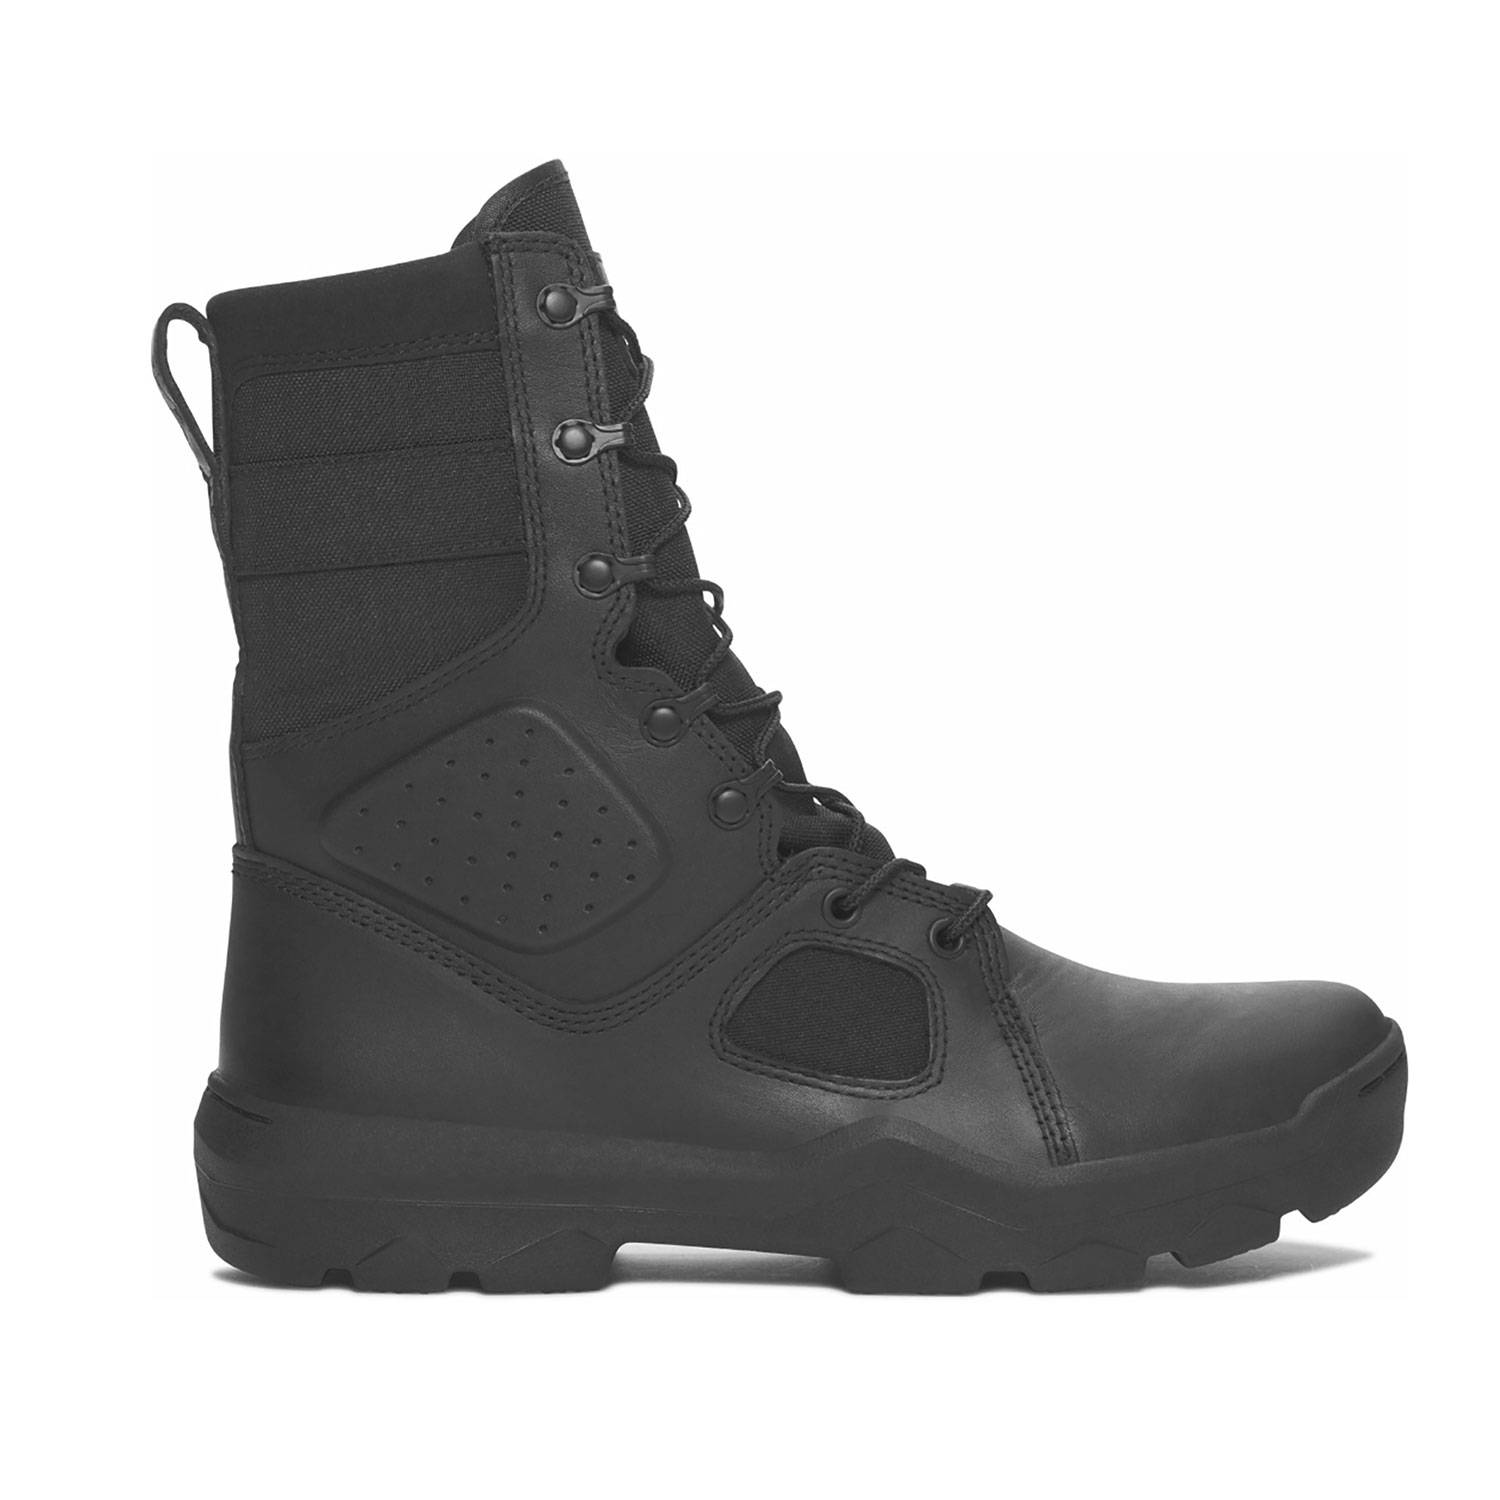 under armour tactical sneakers